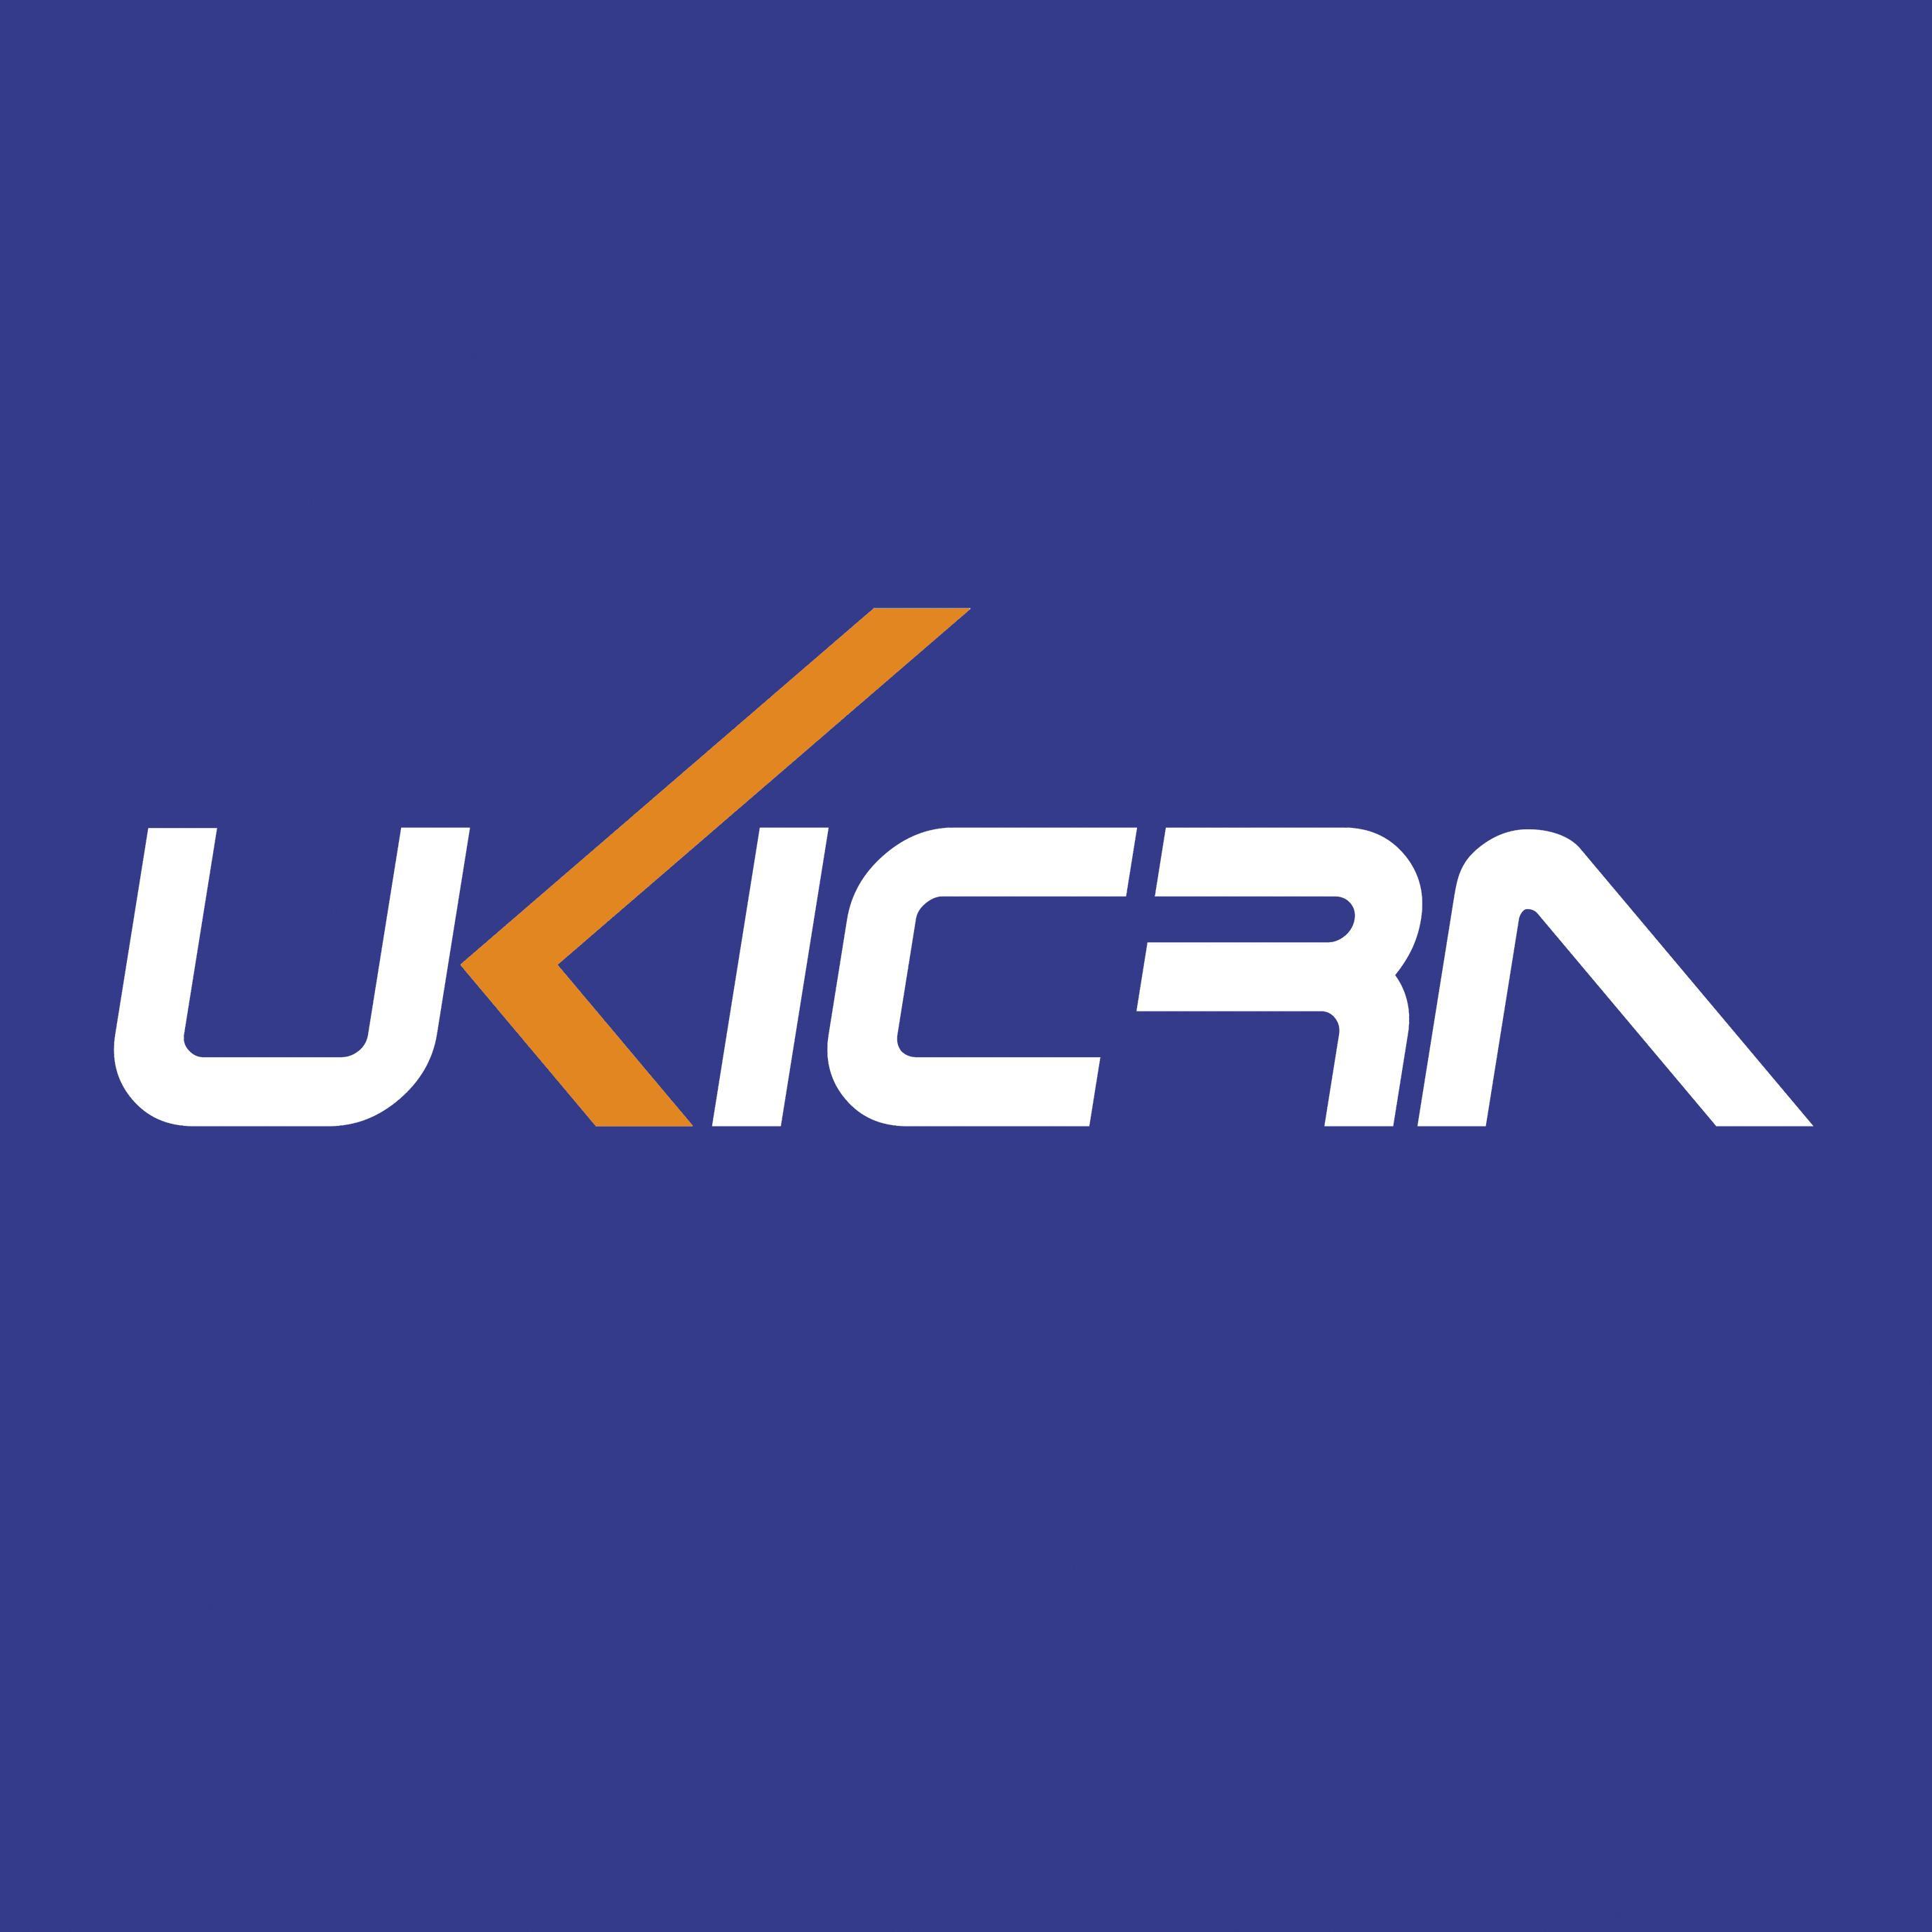 Believe you can create wonderful things!  We are UKICRA #sewing company. Follow us and find fun designs! #sewingmachine